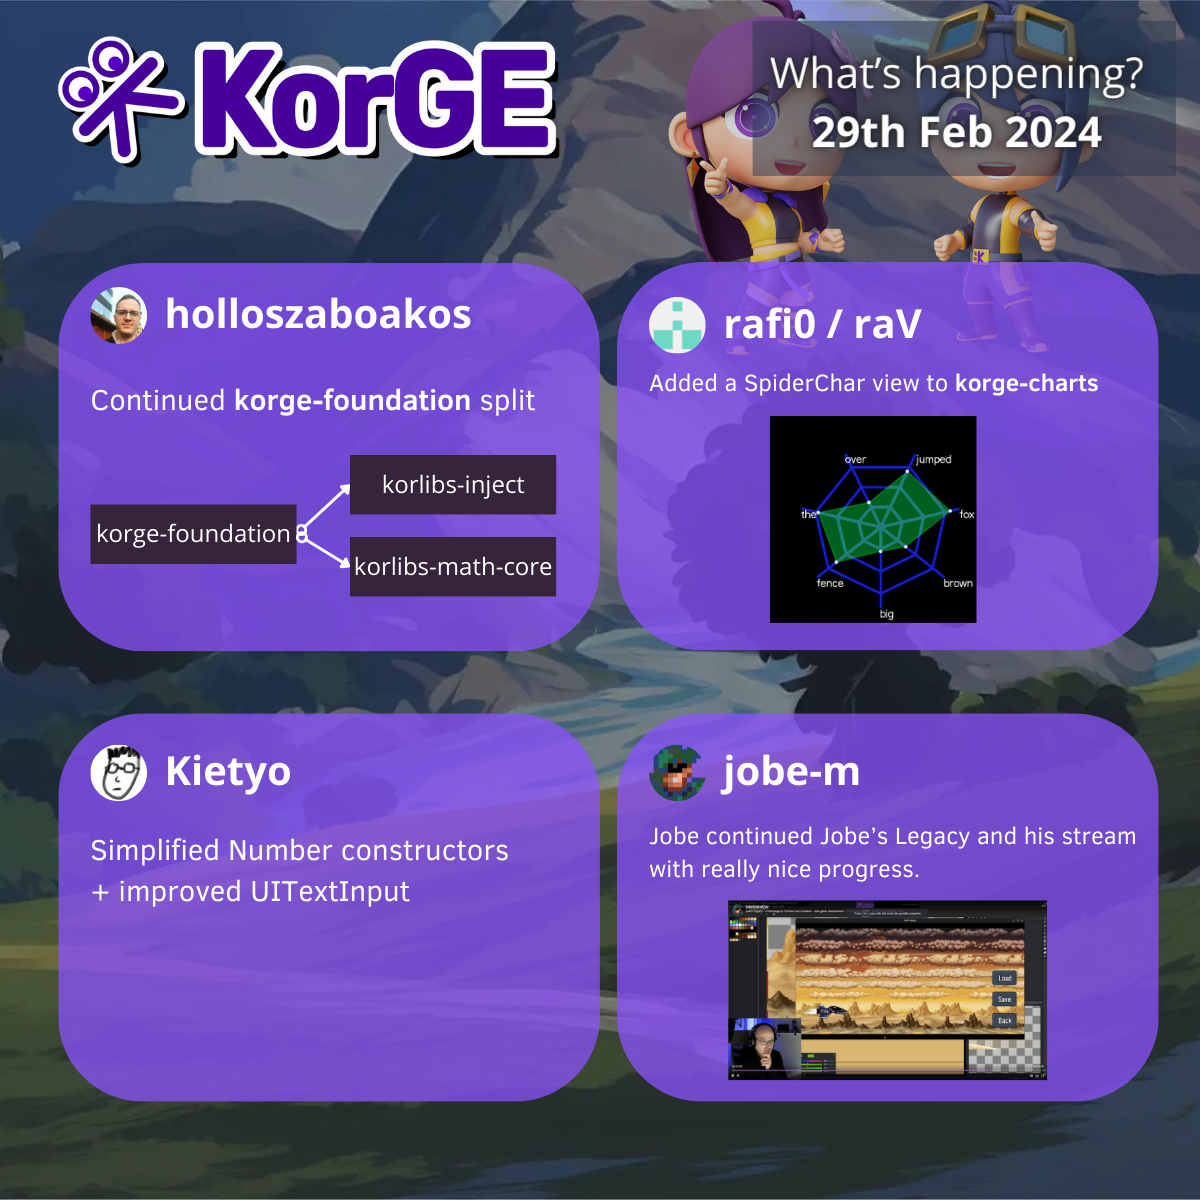 What's Happening with KorGe 29th Feb 2024